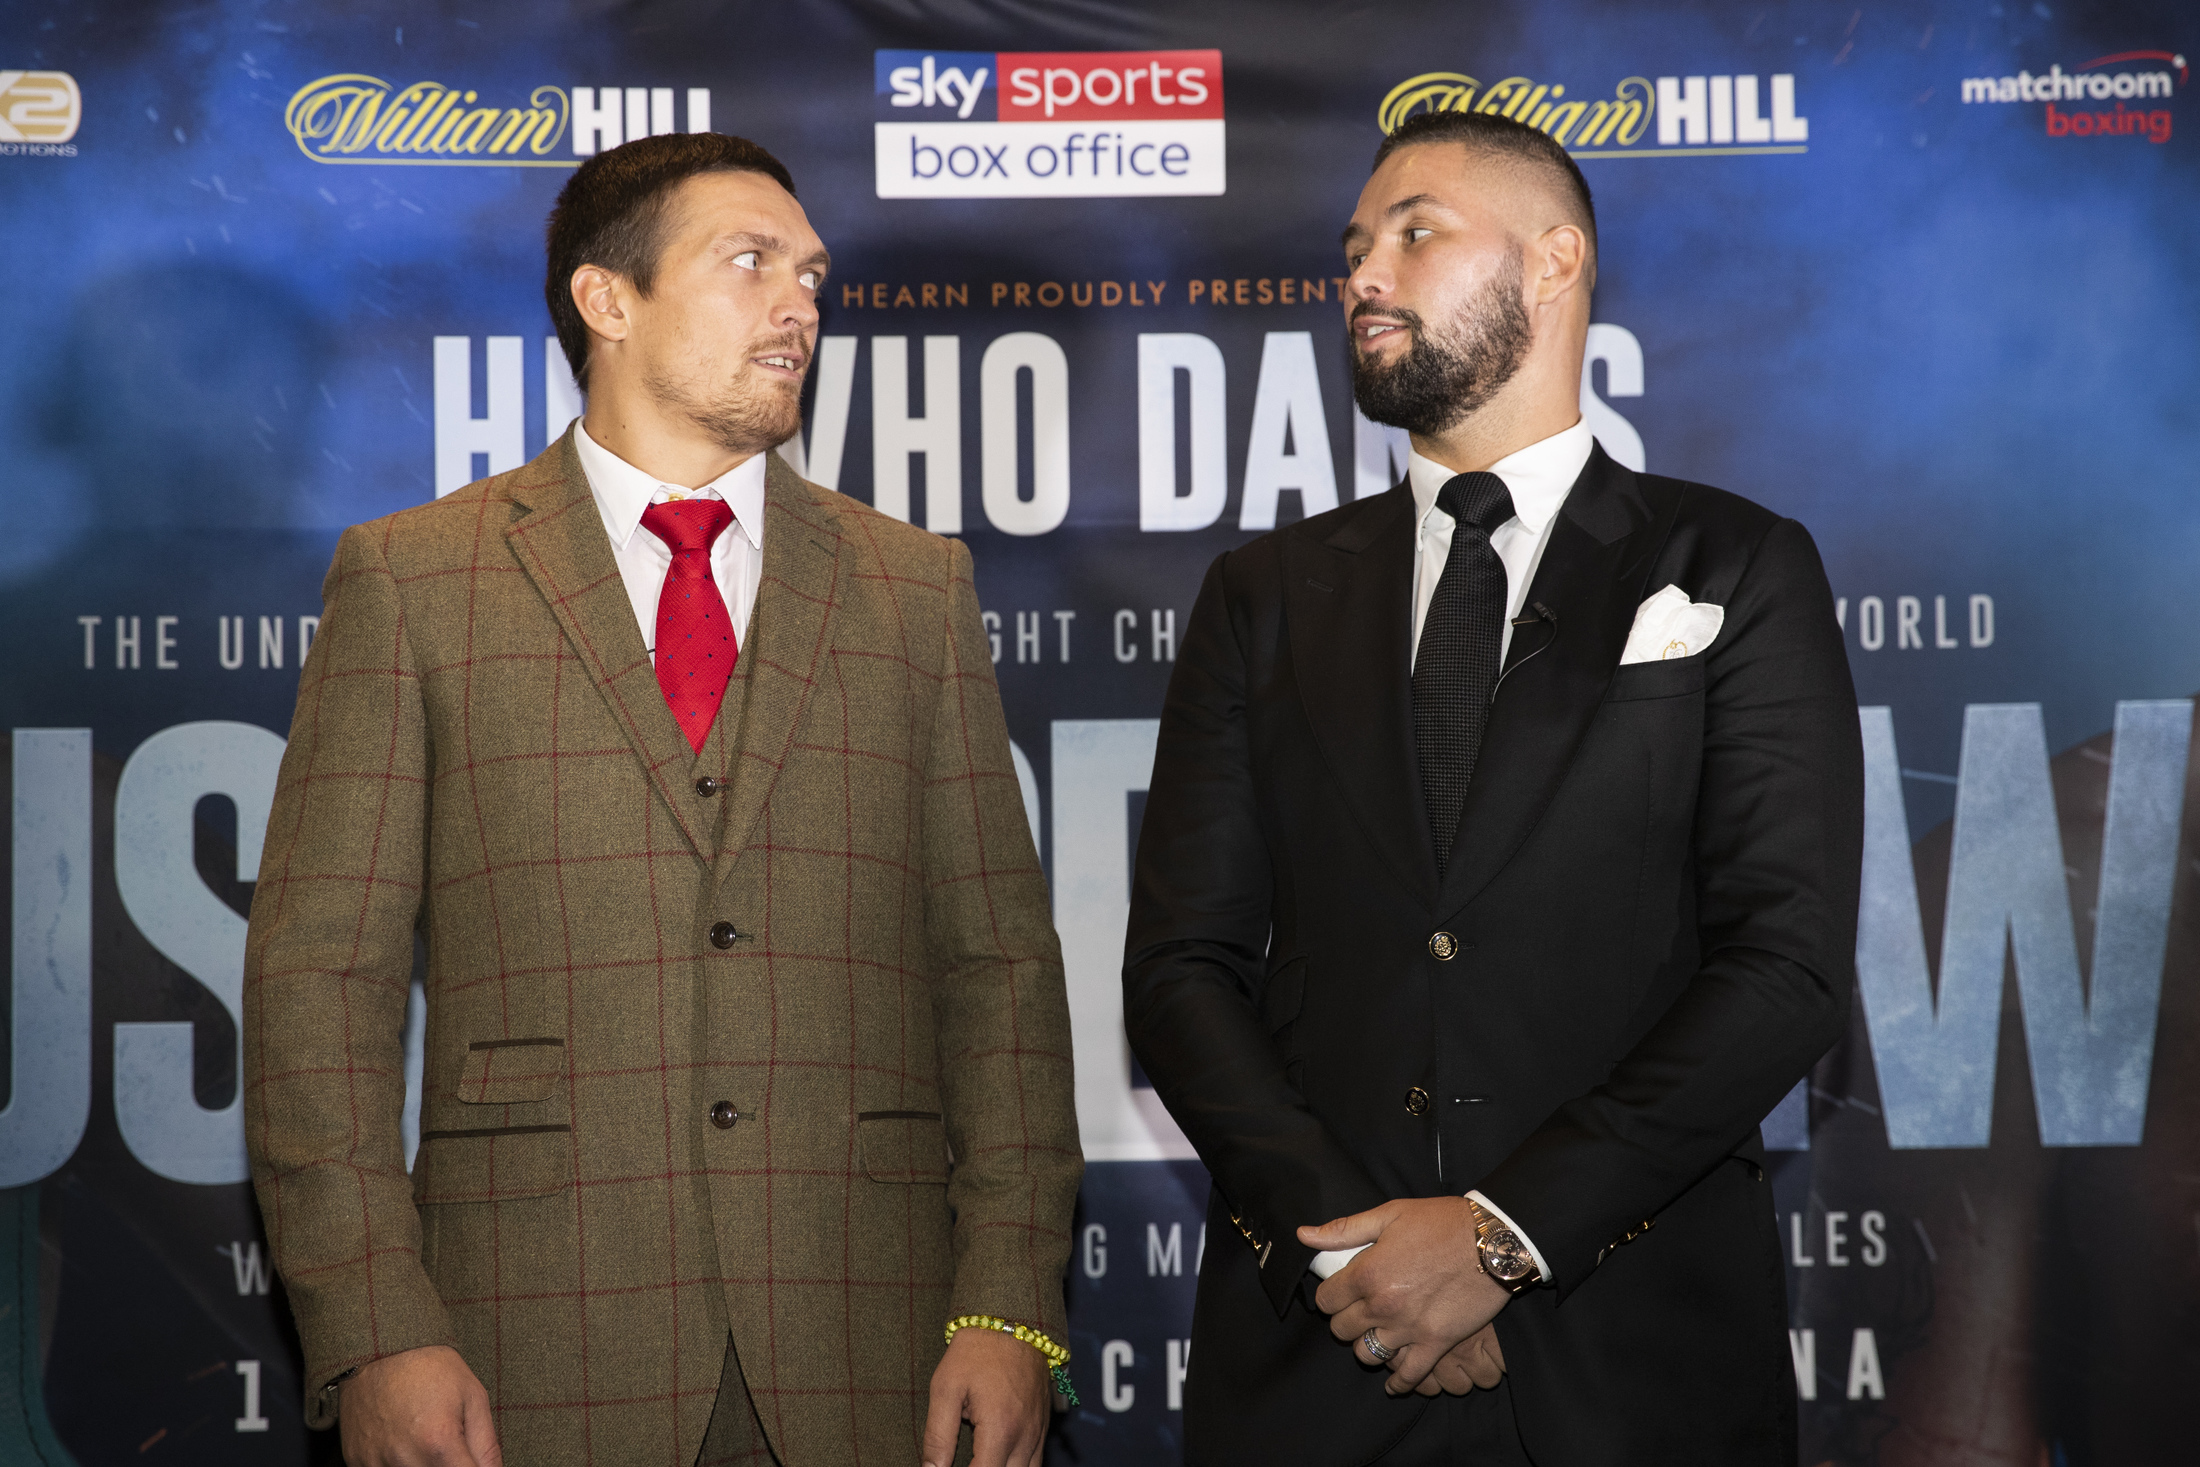 Undisputed cruiserweight champion Aleksandr Usyk (left) and Tony Bellew. Photo by Mark Robinson